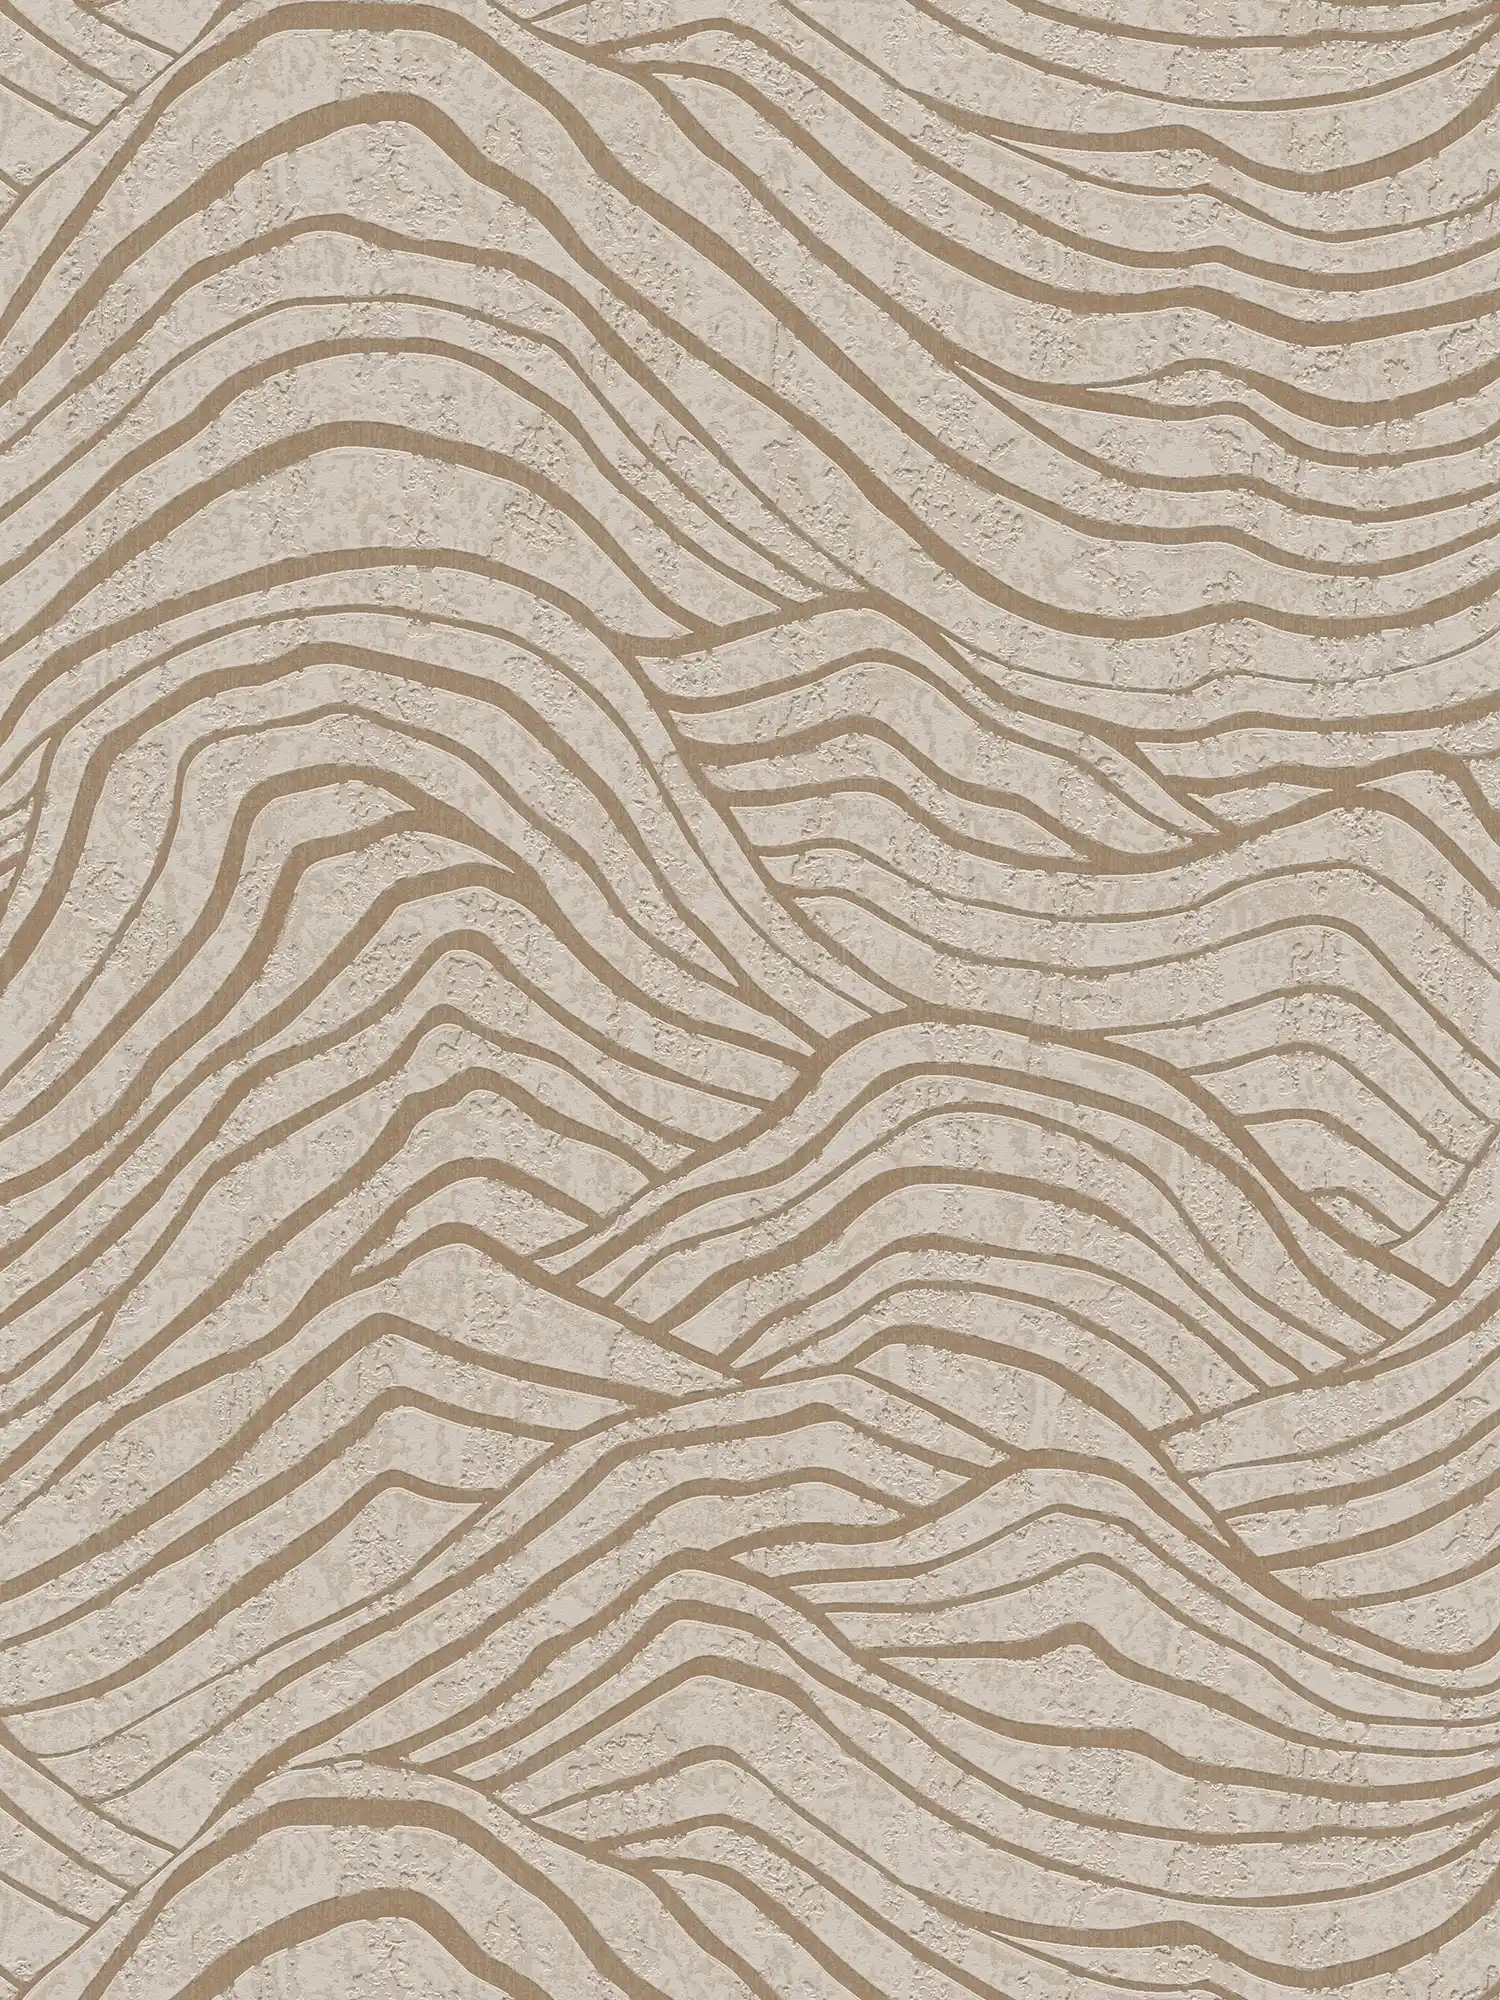         Wallpaper with Asian hill pattern - beige, gold, grey
    